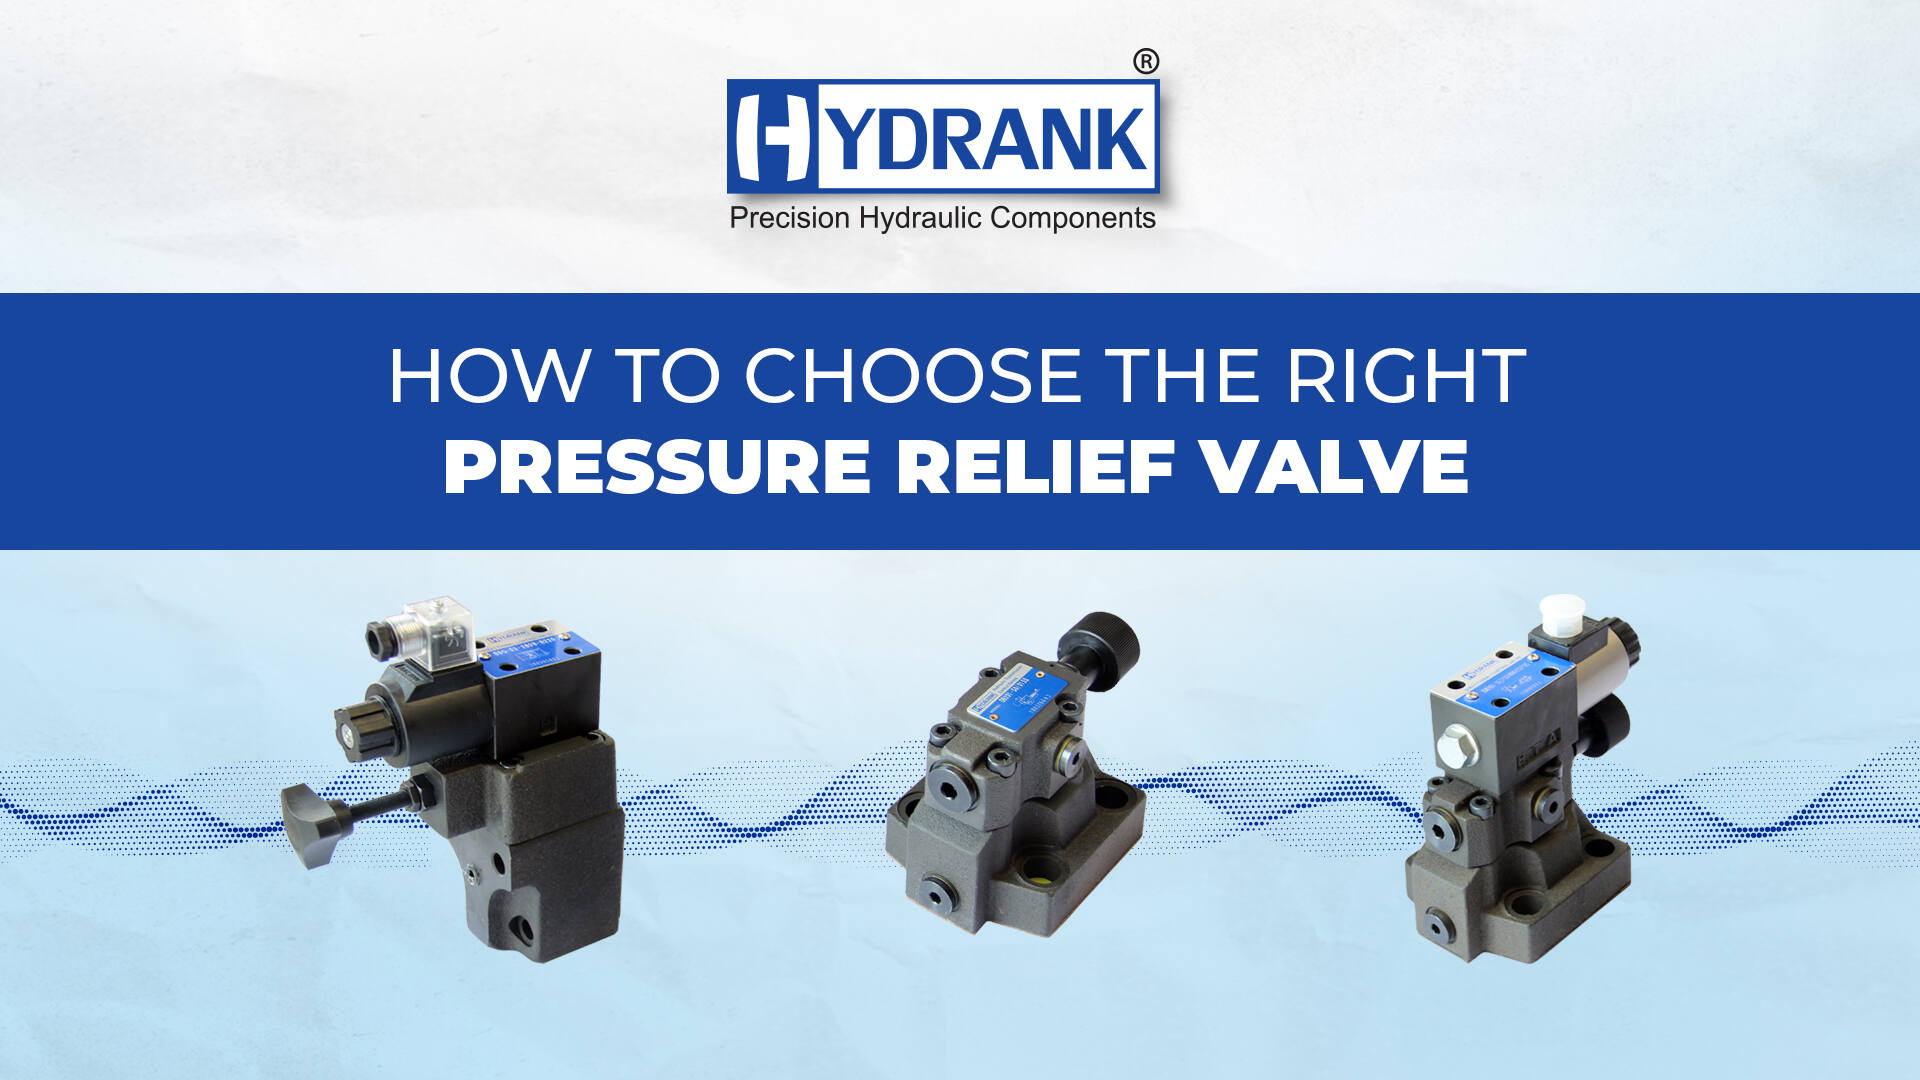 How to Choose the Right Pressure Relief Valve